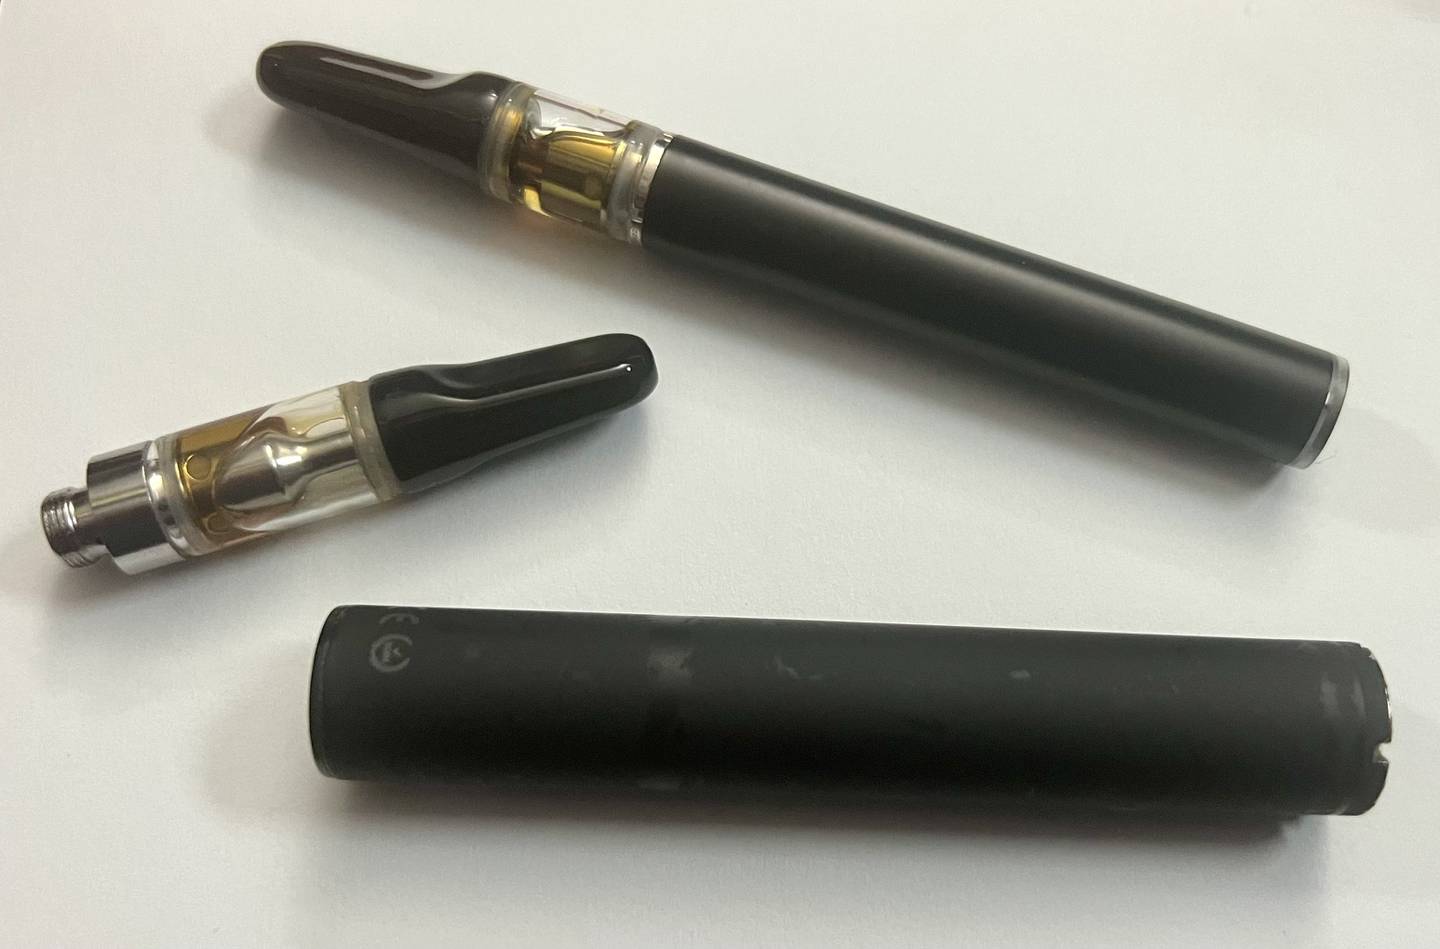 From top: Disposable cannabis vape pen, single cannabis oil-filled cartridge, and rechargeable battery to attach to cartridges.